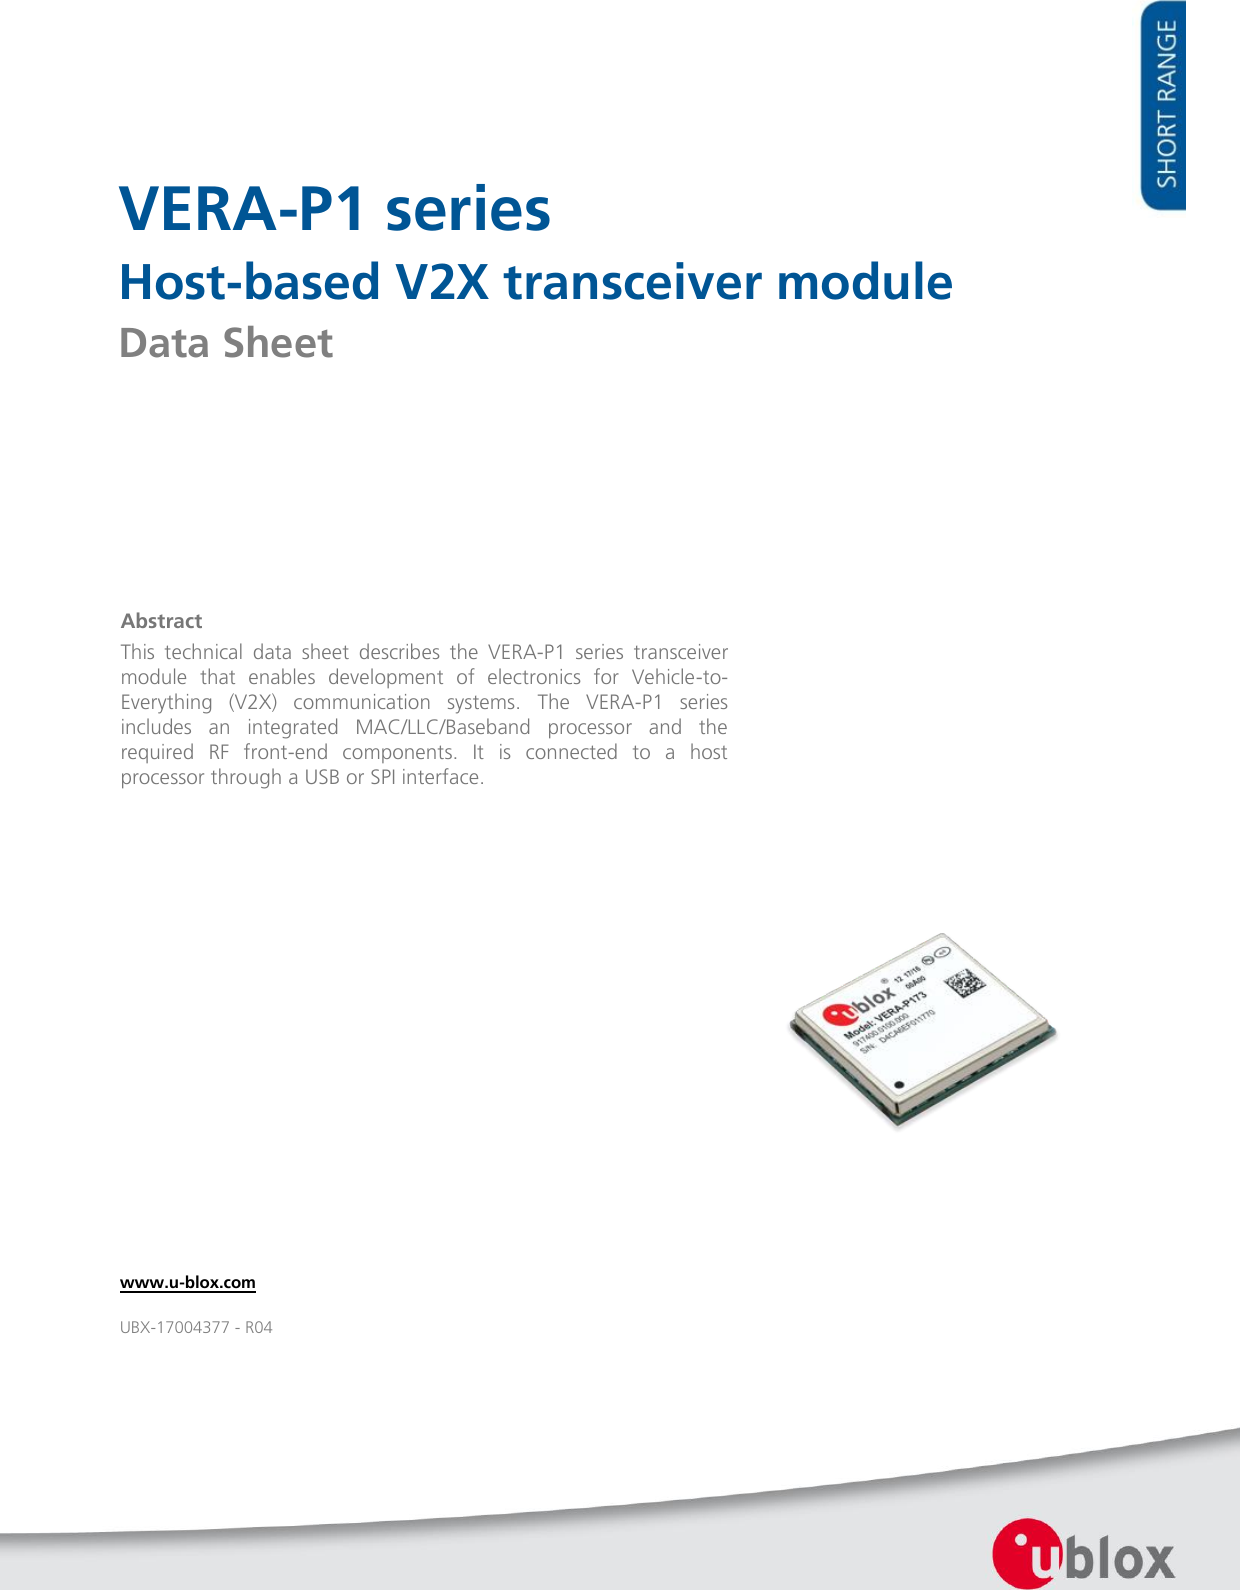     VERA-P1 series Host-based V2X transceiver module Data Sheet                  Abstract This  technical  data  sheet  describes  the  VERA-P1  series  transceiver module  that  enables  development  of  electronics  for  Vehicle-to-Everything  (V2X)  communication  systems.  The  VERA-P1  series includes  an  integrated  MAC/LLC/Baseband  processor  and  the required  RF  front-end  components.  It  is  connected  to  a  host processor through a USB or SPI interface. www.u-blox.com UBX-17004377 - R04 